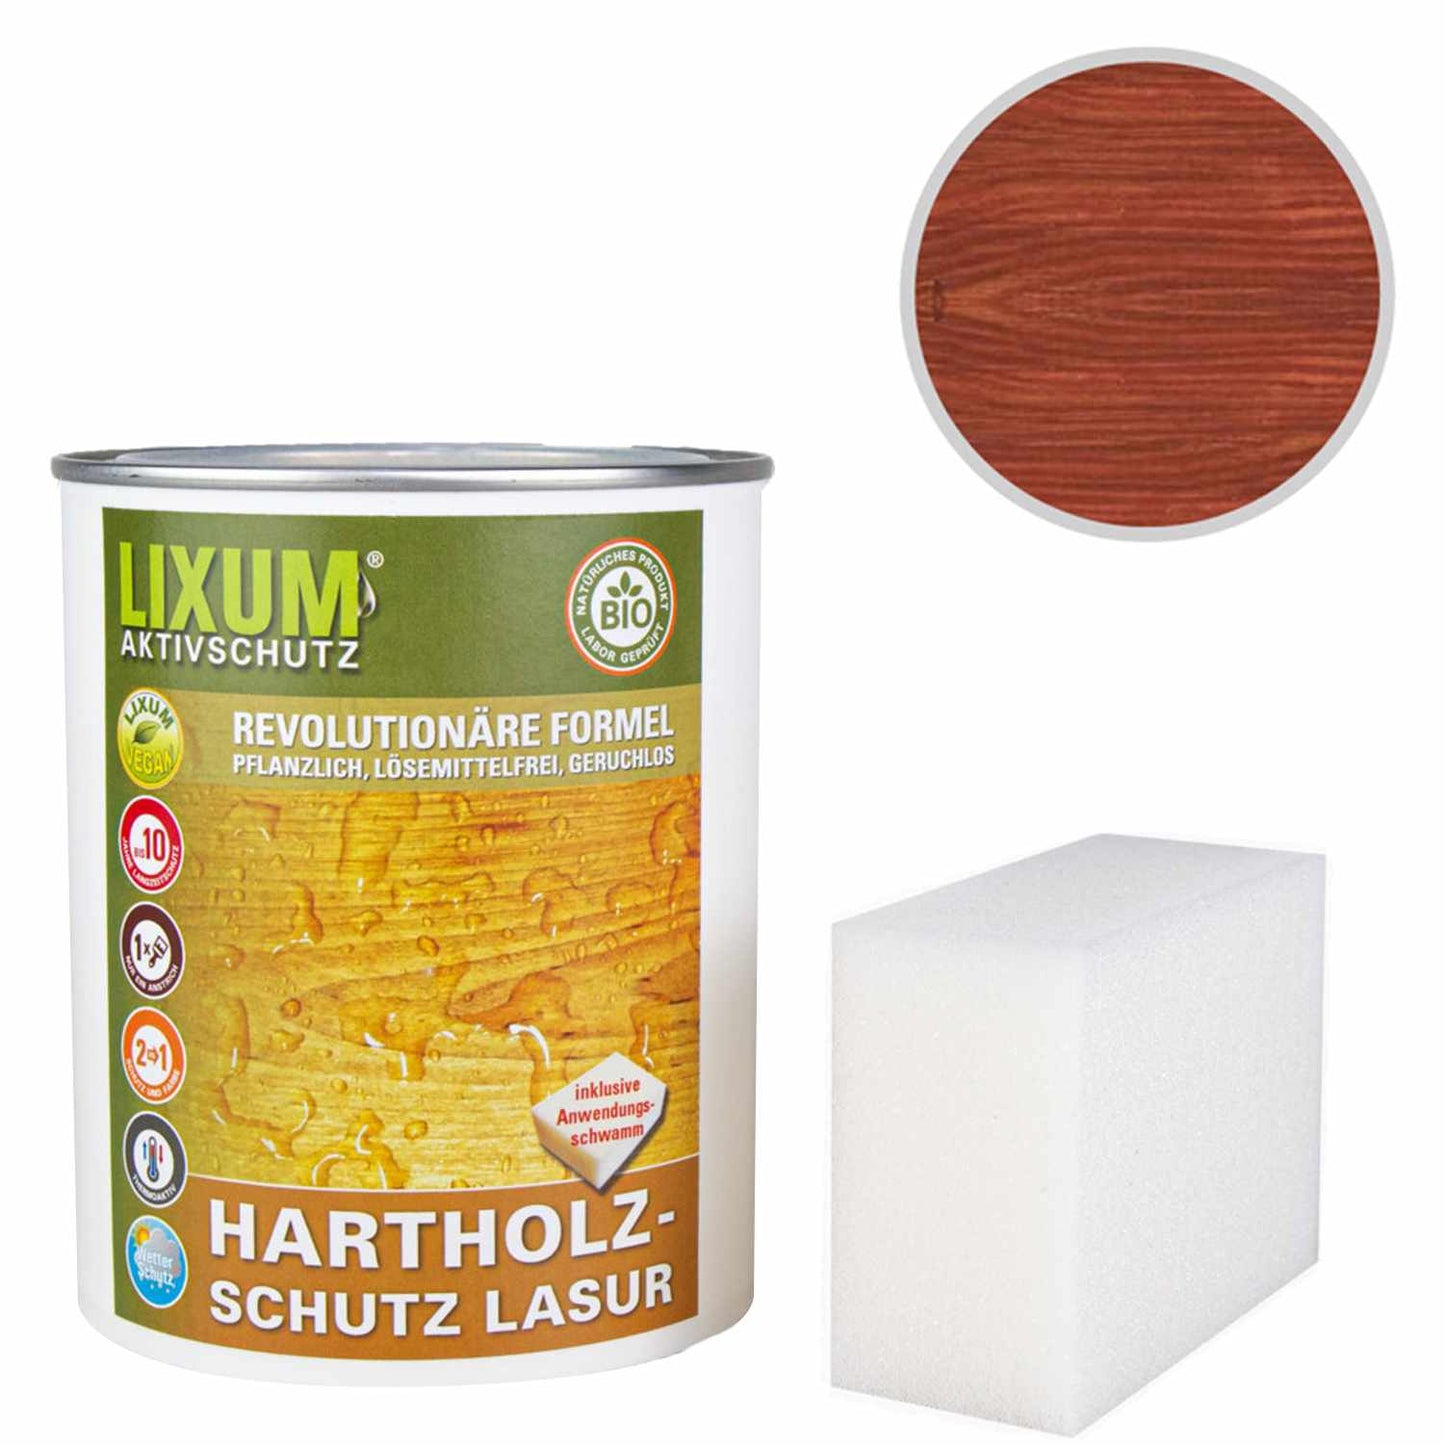 Biological wood protection hardwood protection glaze - maple - wood protection & wood care for outside